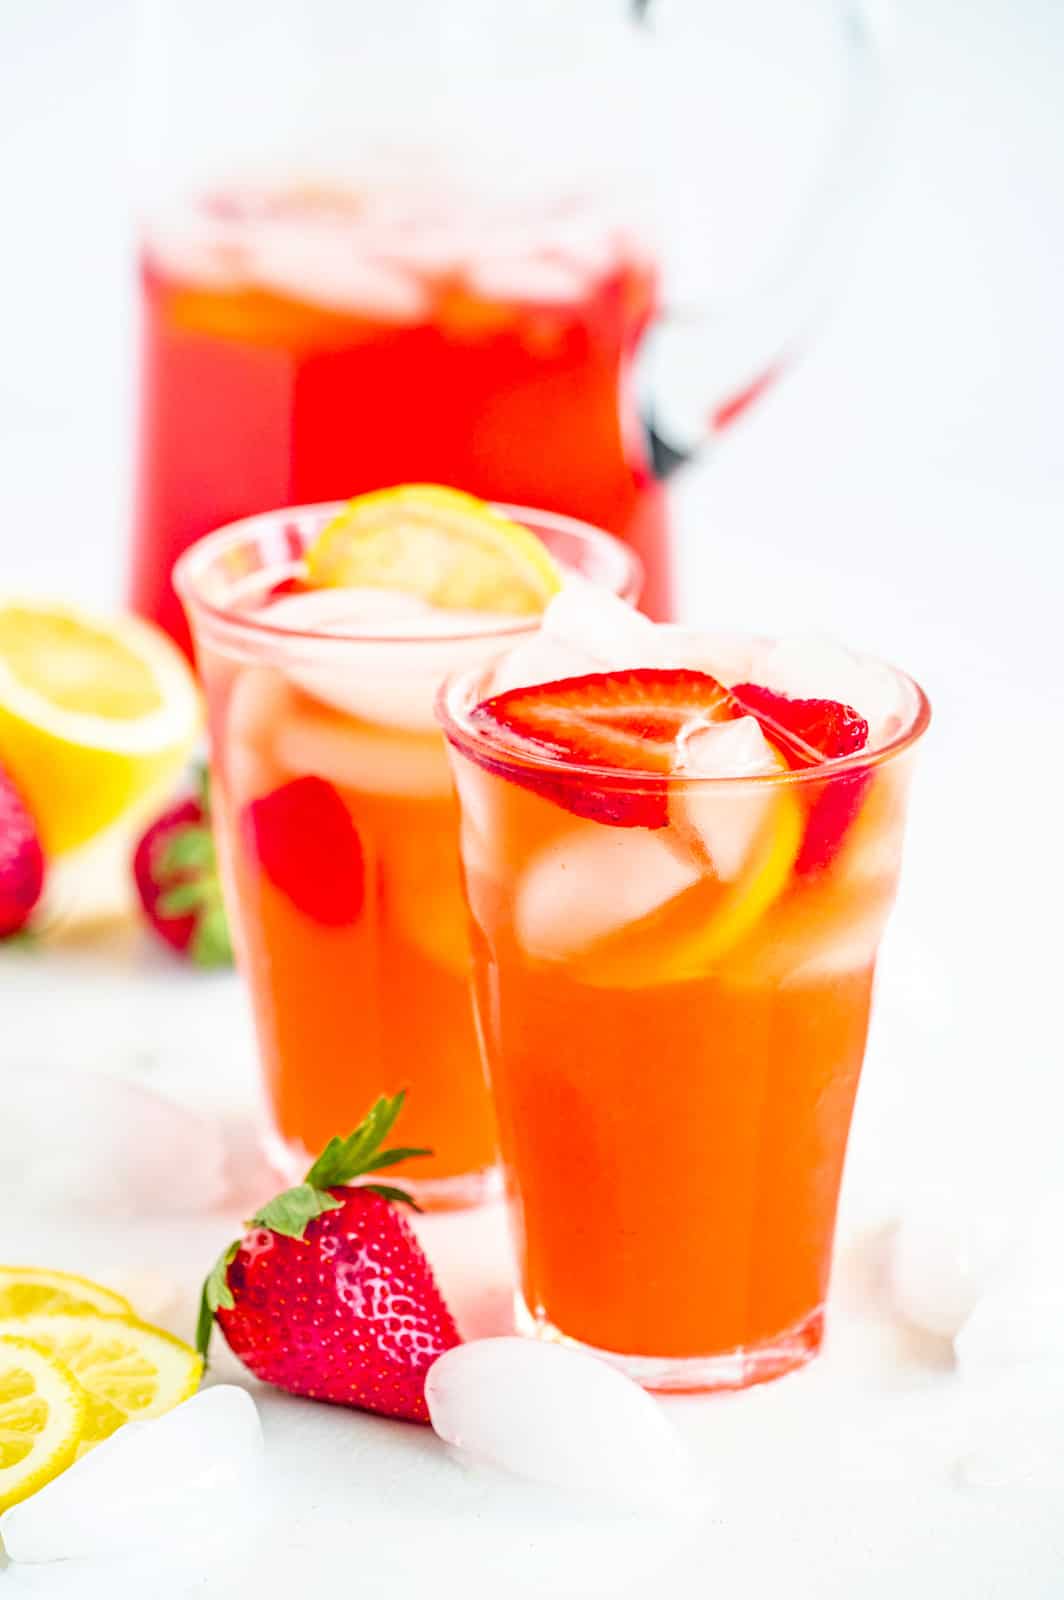 Strawberry Lemonade Recipe in glasses with pitcher in background